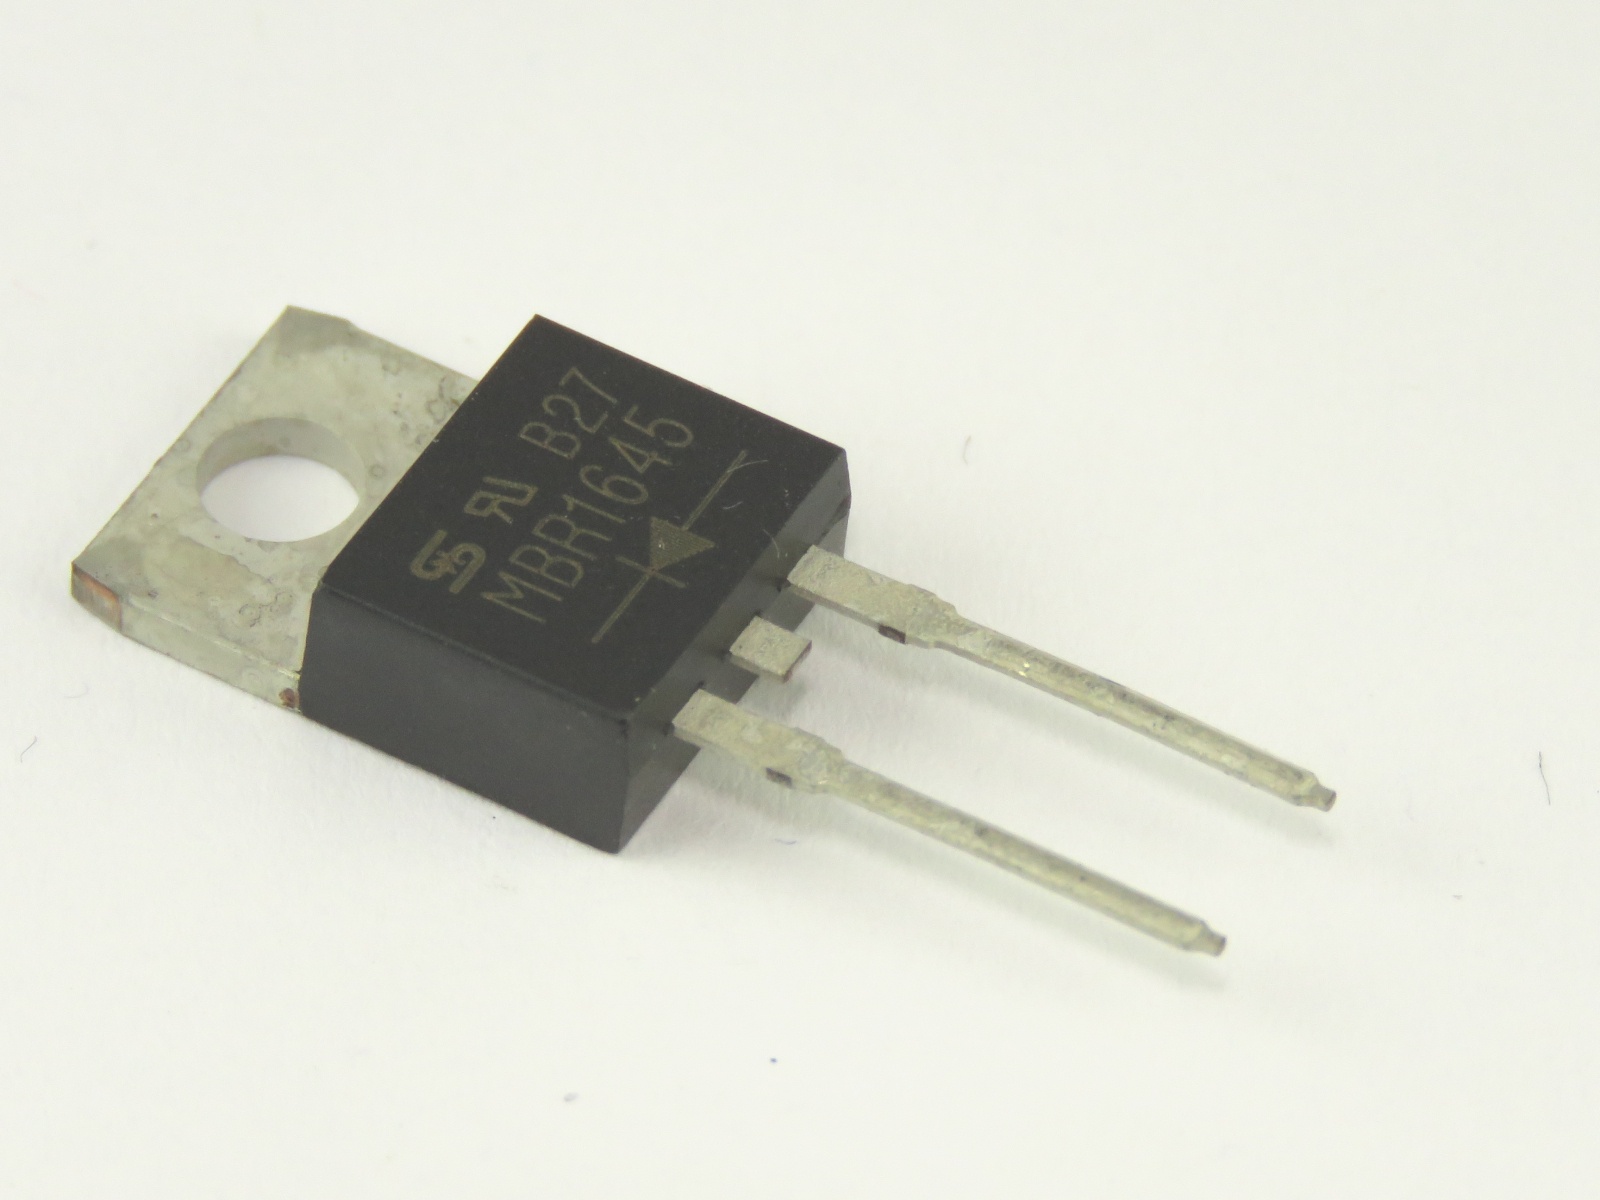 Diode MBR1645 (image 2/2)